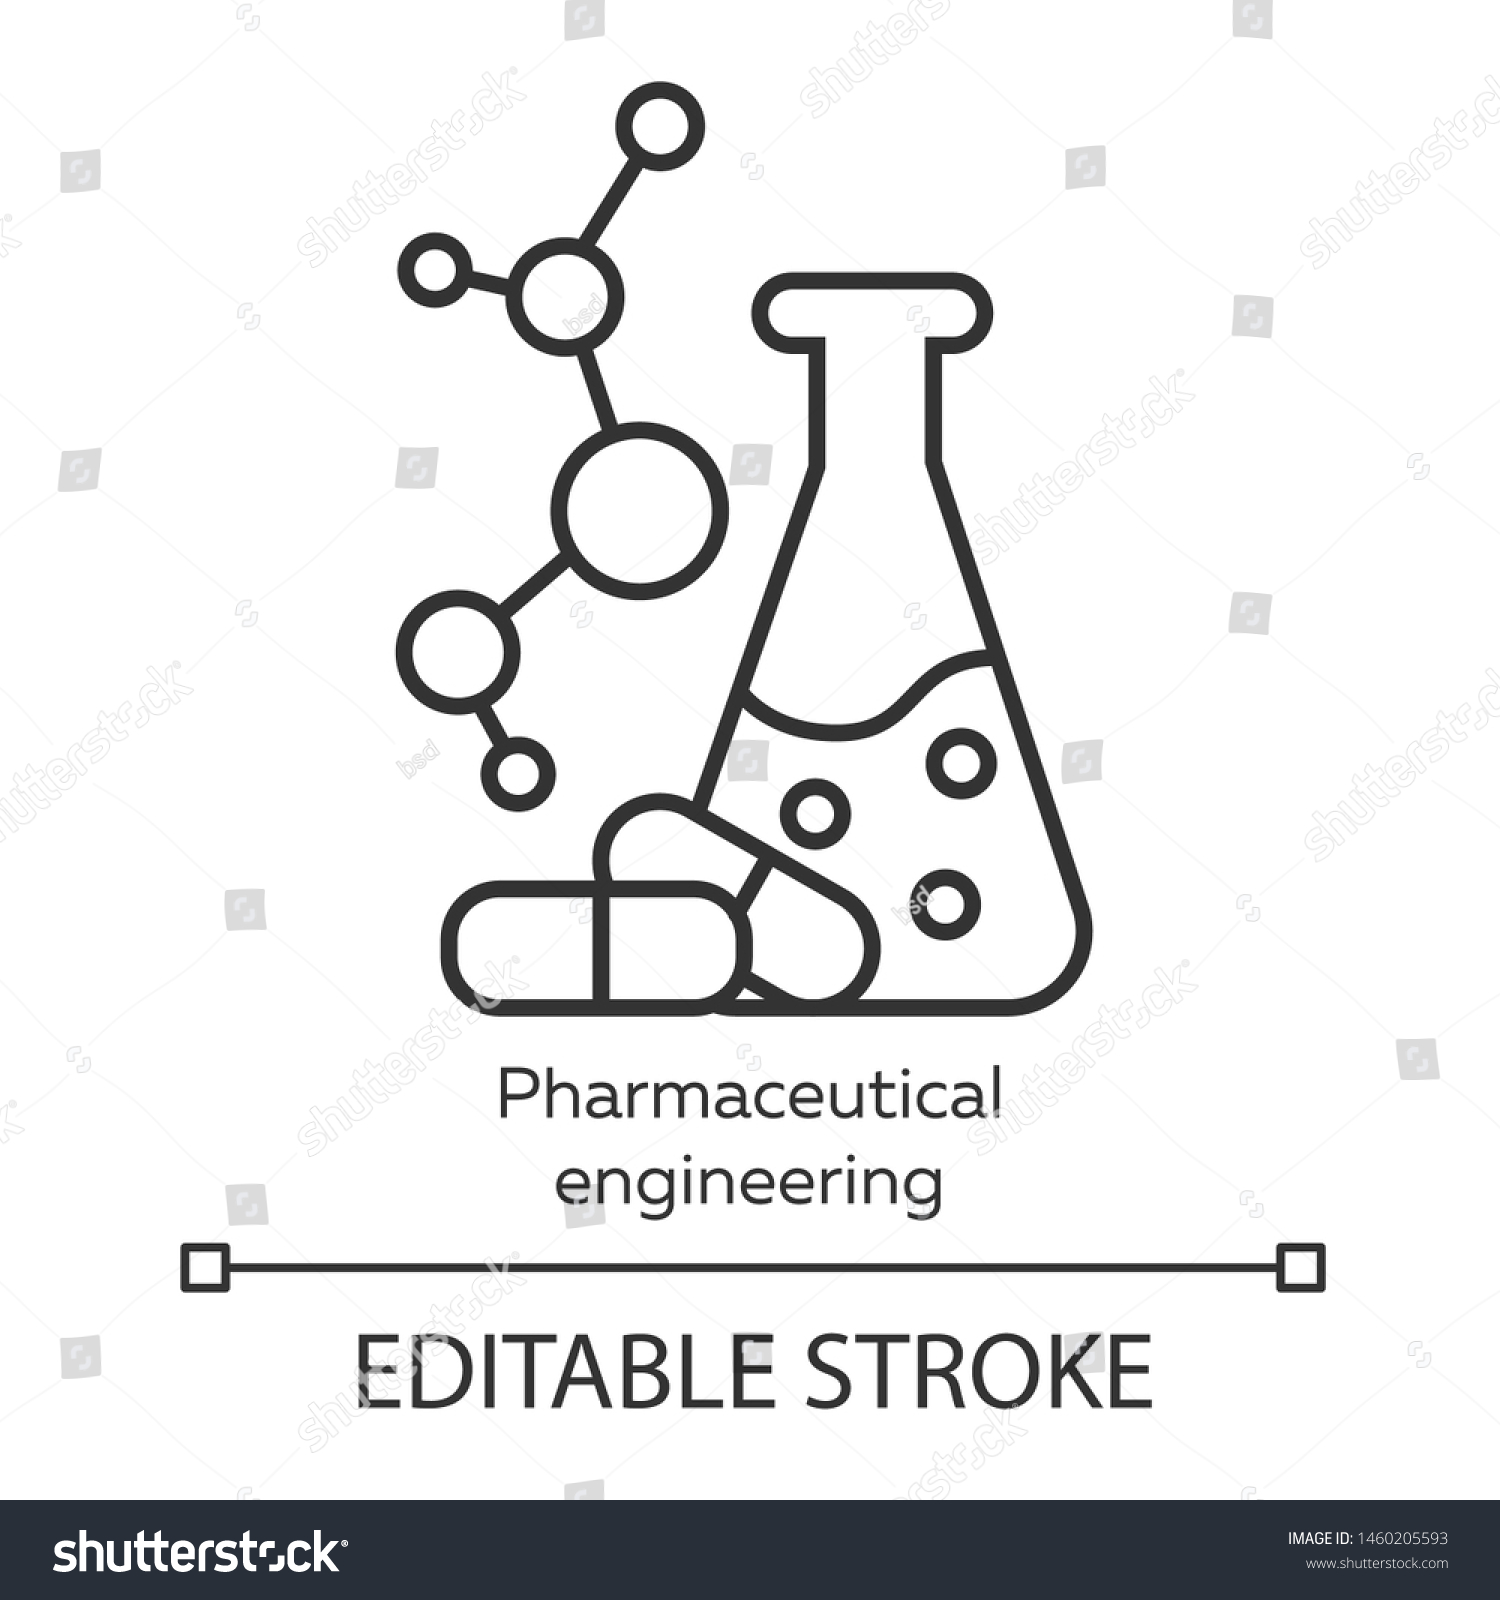 Pharmaceutical engineering linear icon. Chemical engineering. Flask, molecule, capsules. Pharmacology. Thin line illustration. Contour symbol. Vector isolated outline drawing. Editable stroke #1460205593